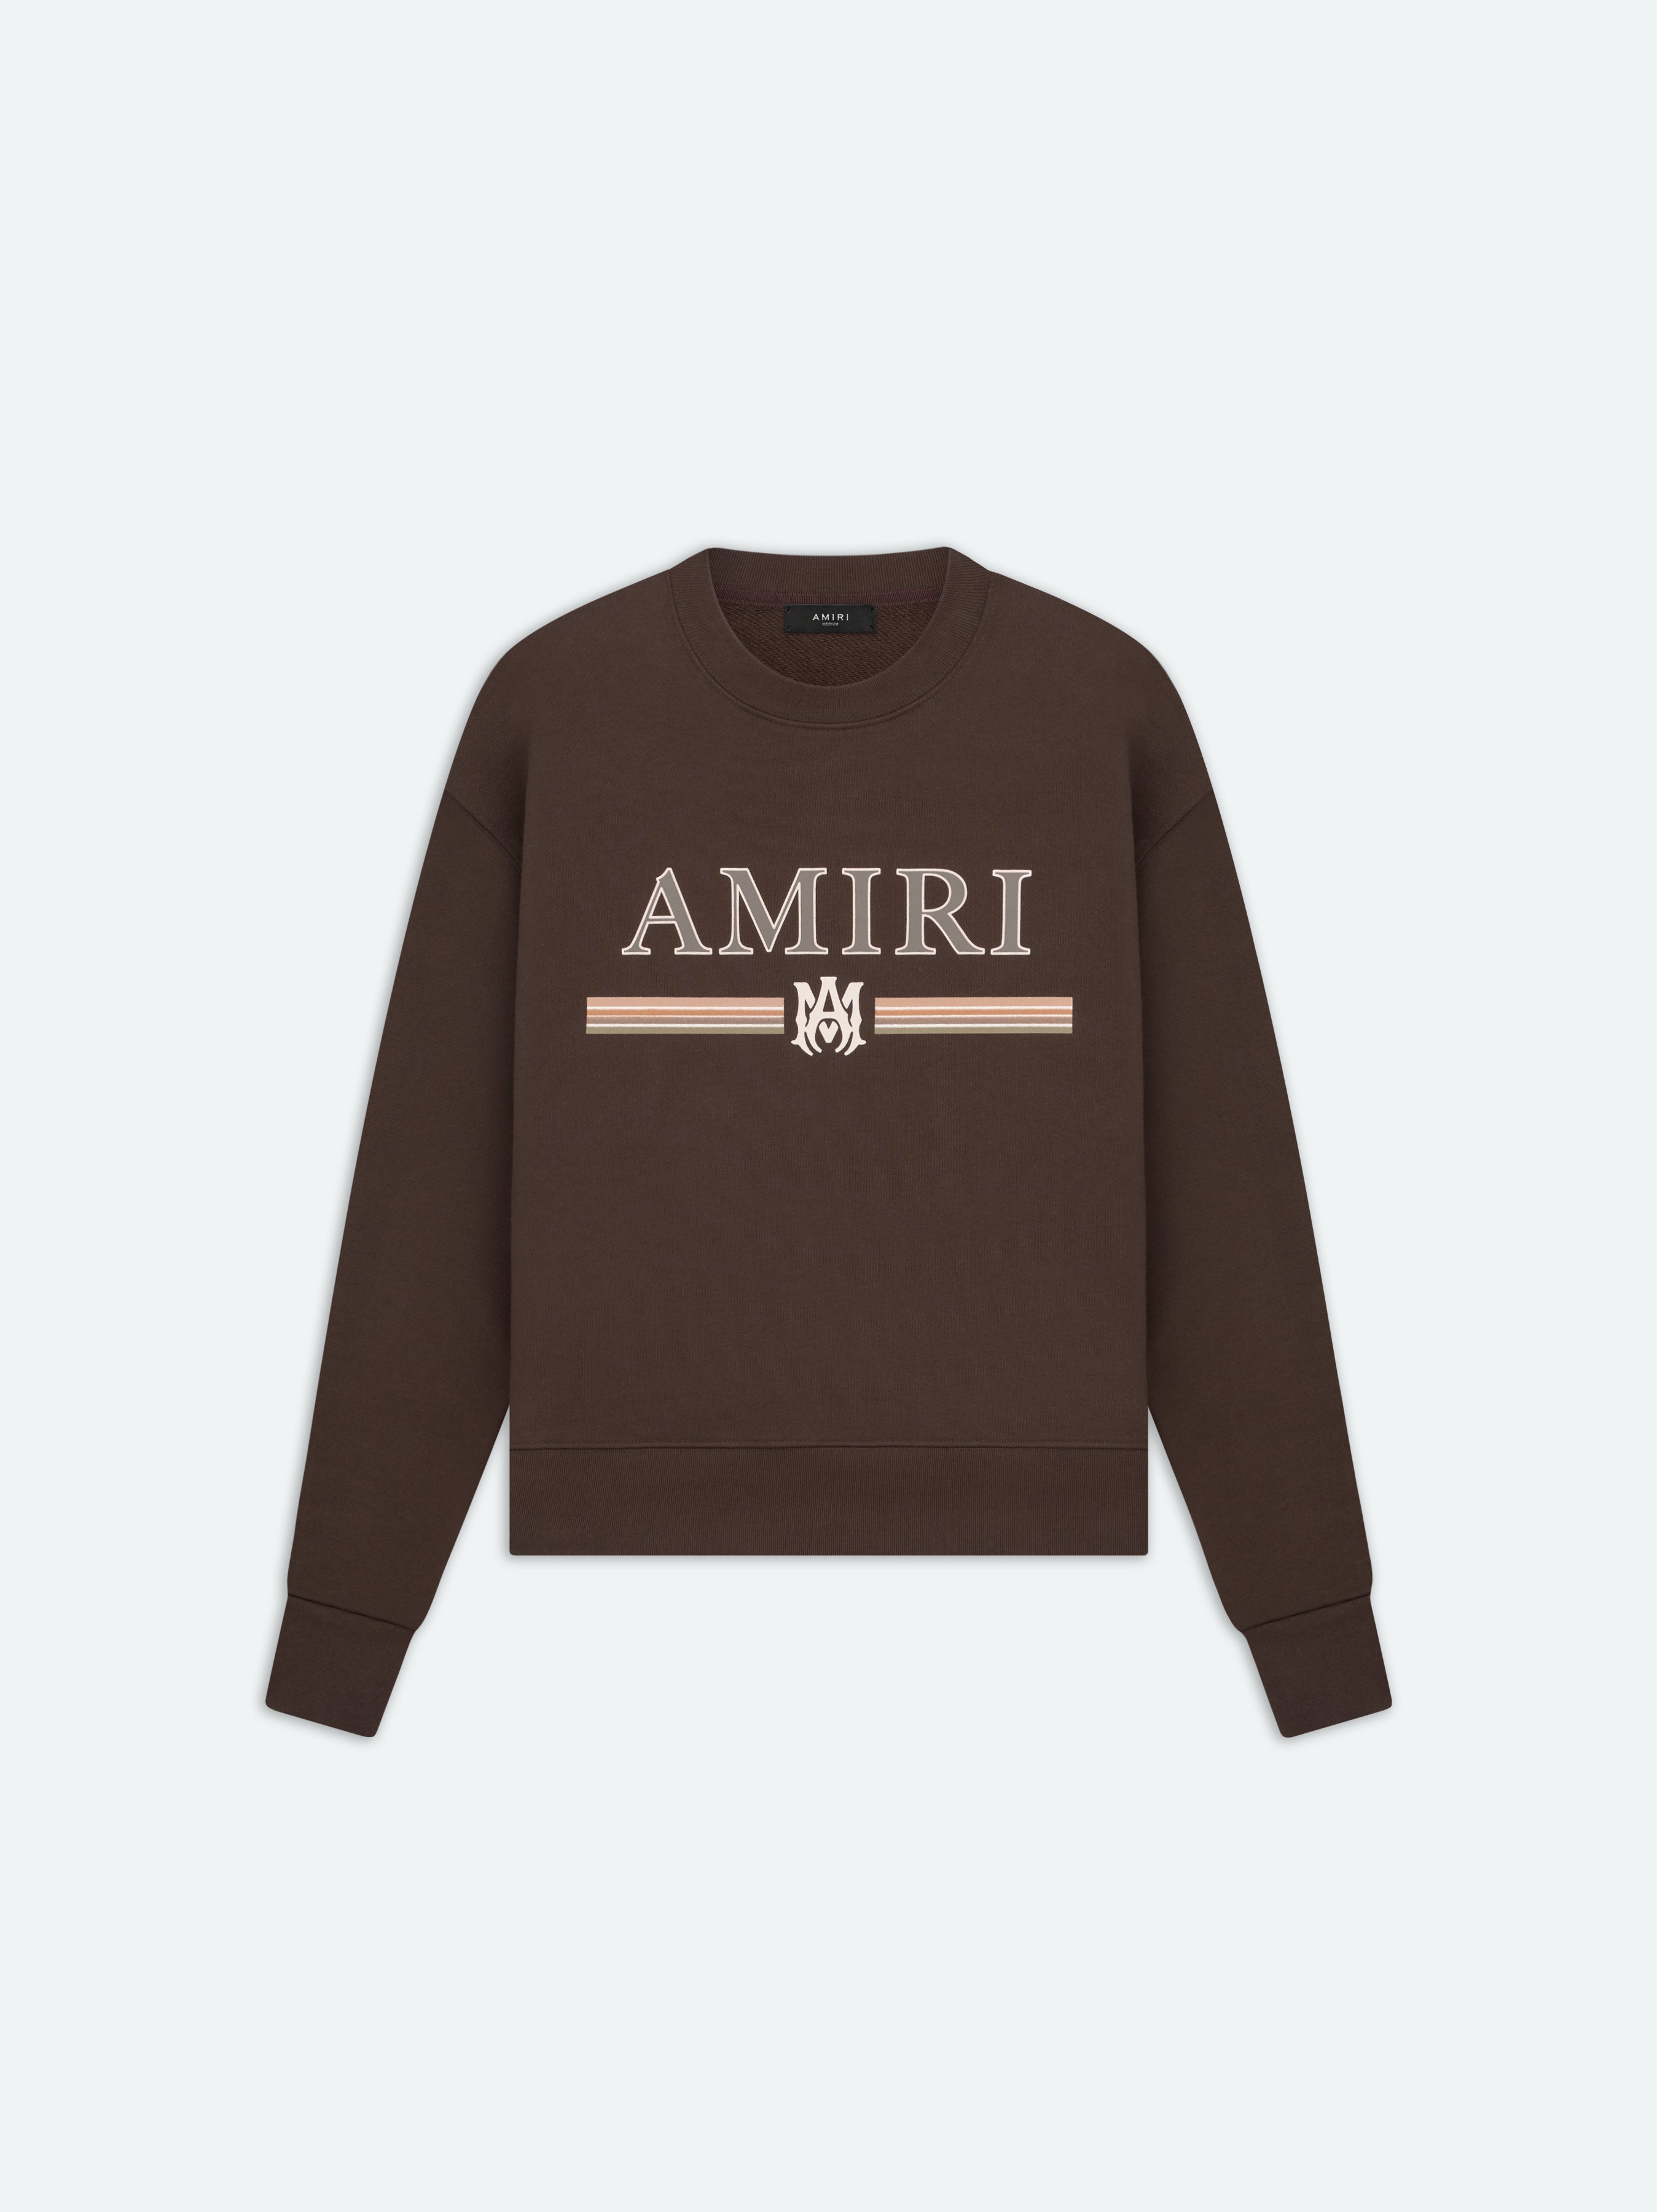 Product MA BAR CREWNECK - BROWN-COTTON featured image